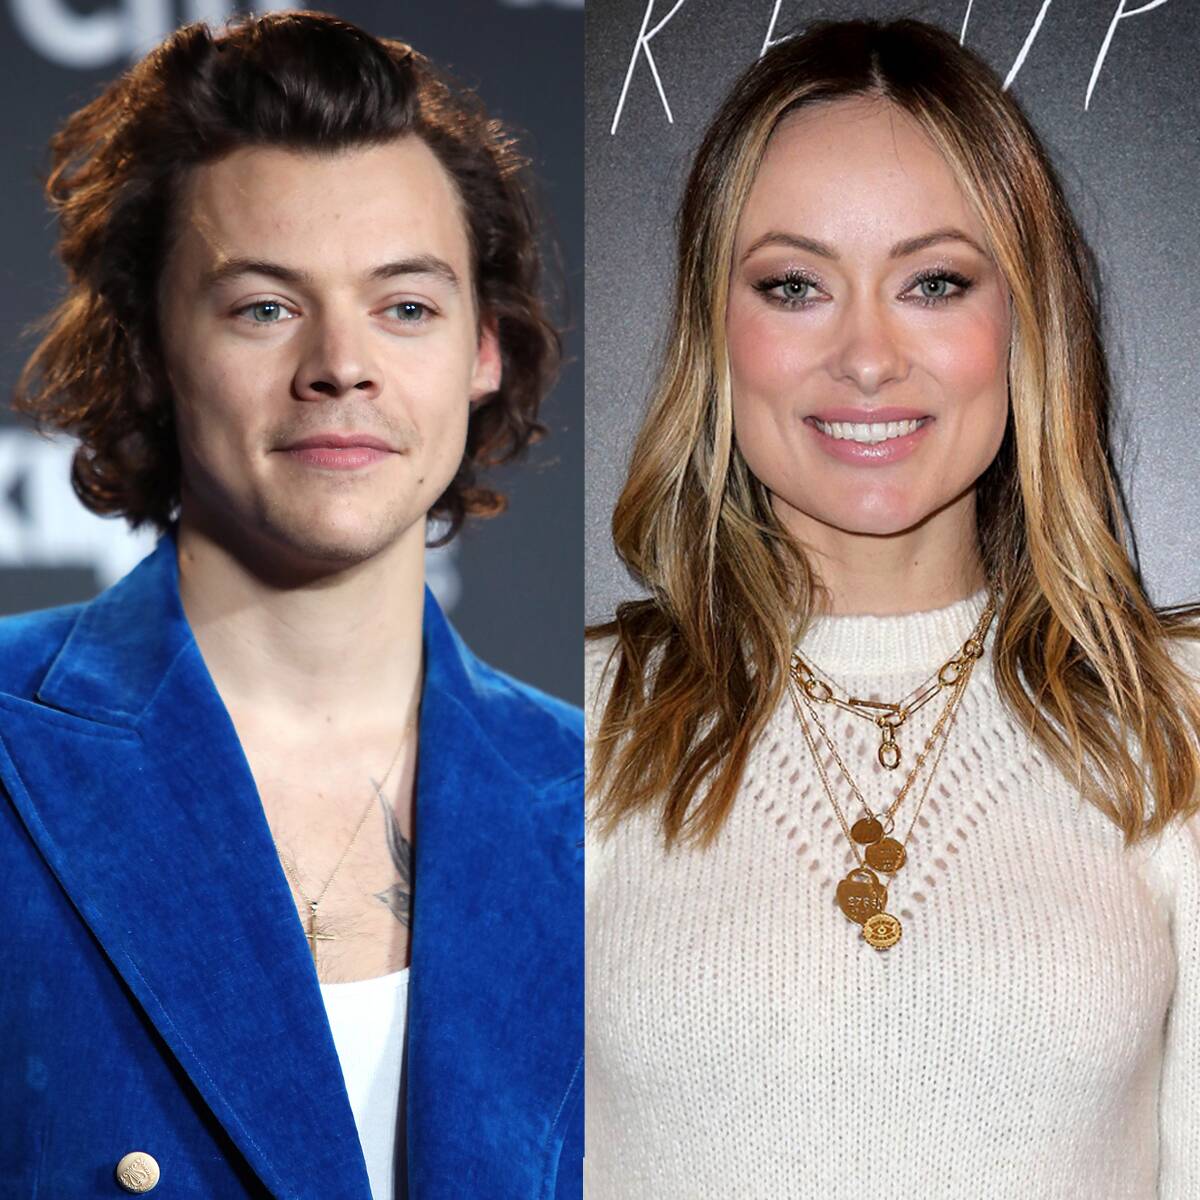 Inside Harry Styles and Olivia Wilde's "Intense Connection" as They Jet Off to London Post-Filming